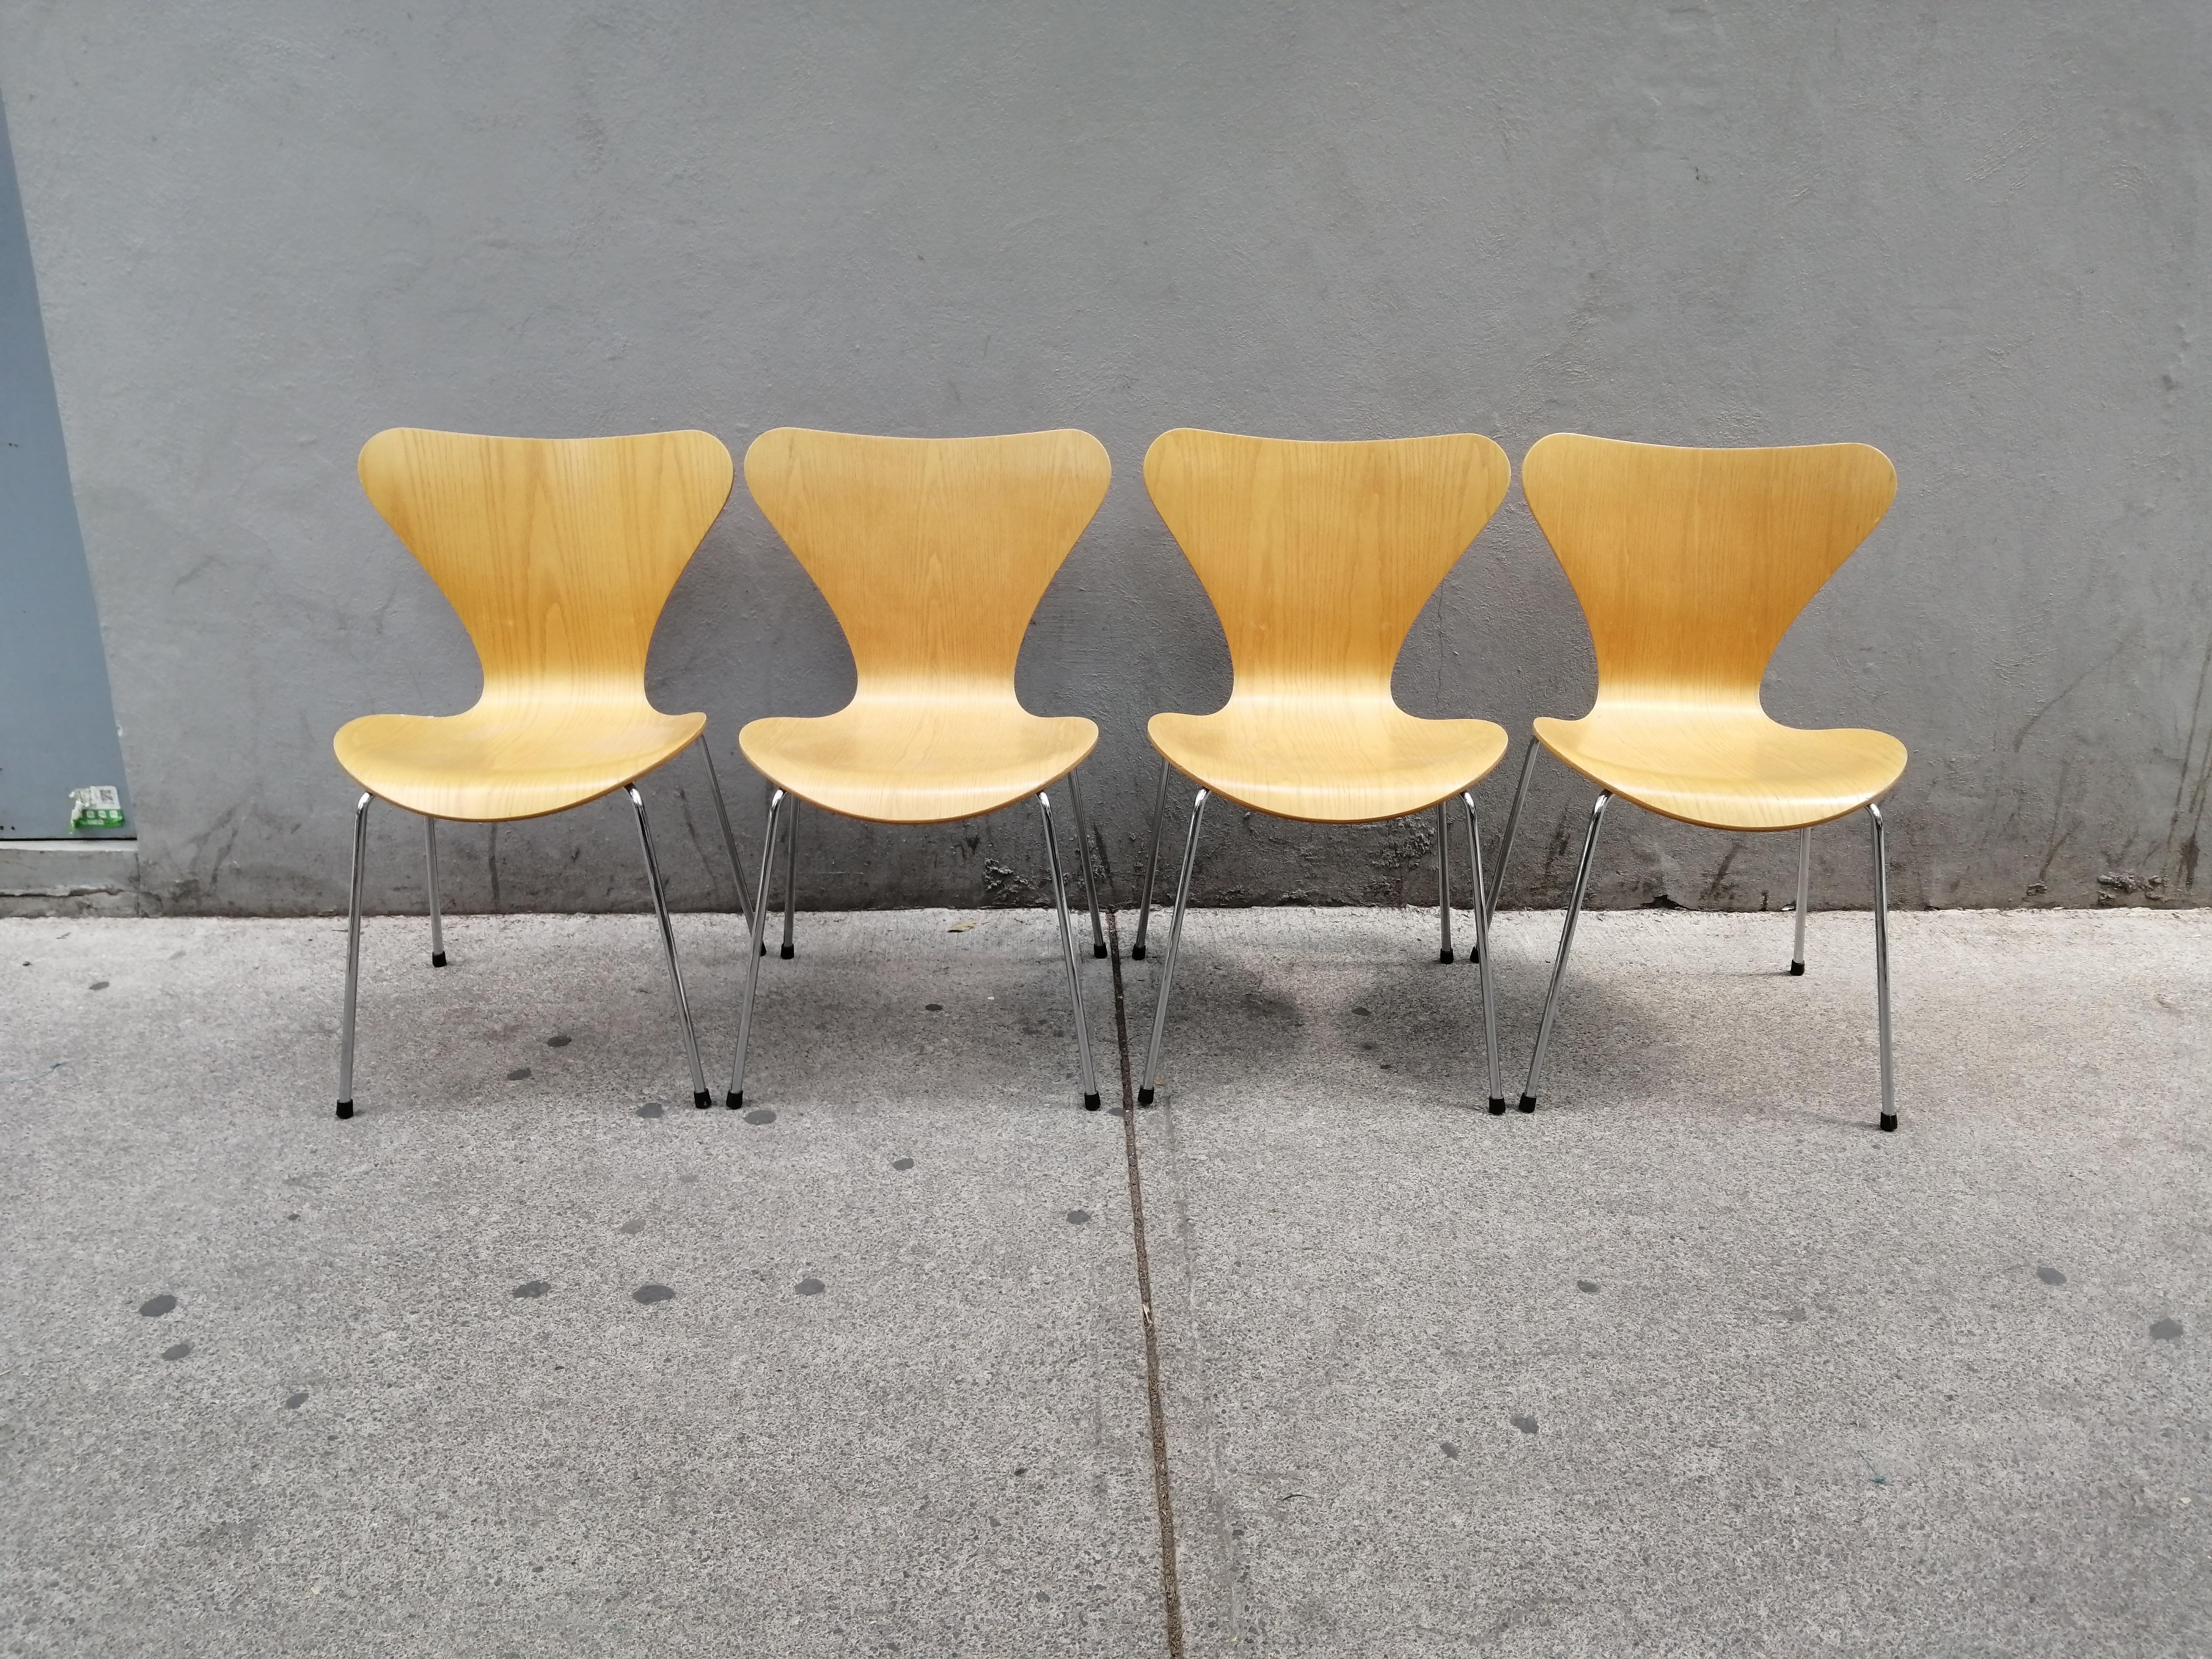 A set of 4 ash plywood and steel model 3107 (number 7) chairs by Arne Jacobsen. These chairs were manufactured in 1999 by Fritz Hansen and distributed by Knoll Studio. The chair's wood structures show lovely veneer grains.

We currently have other